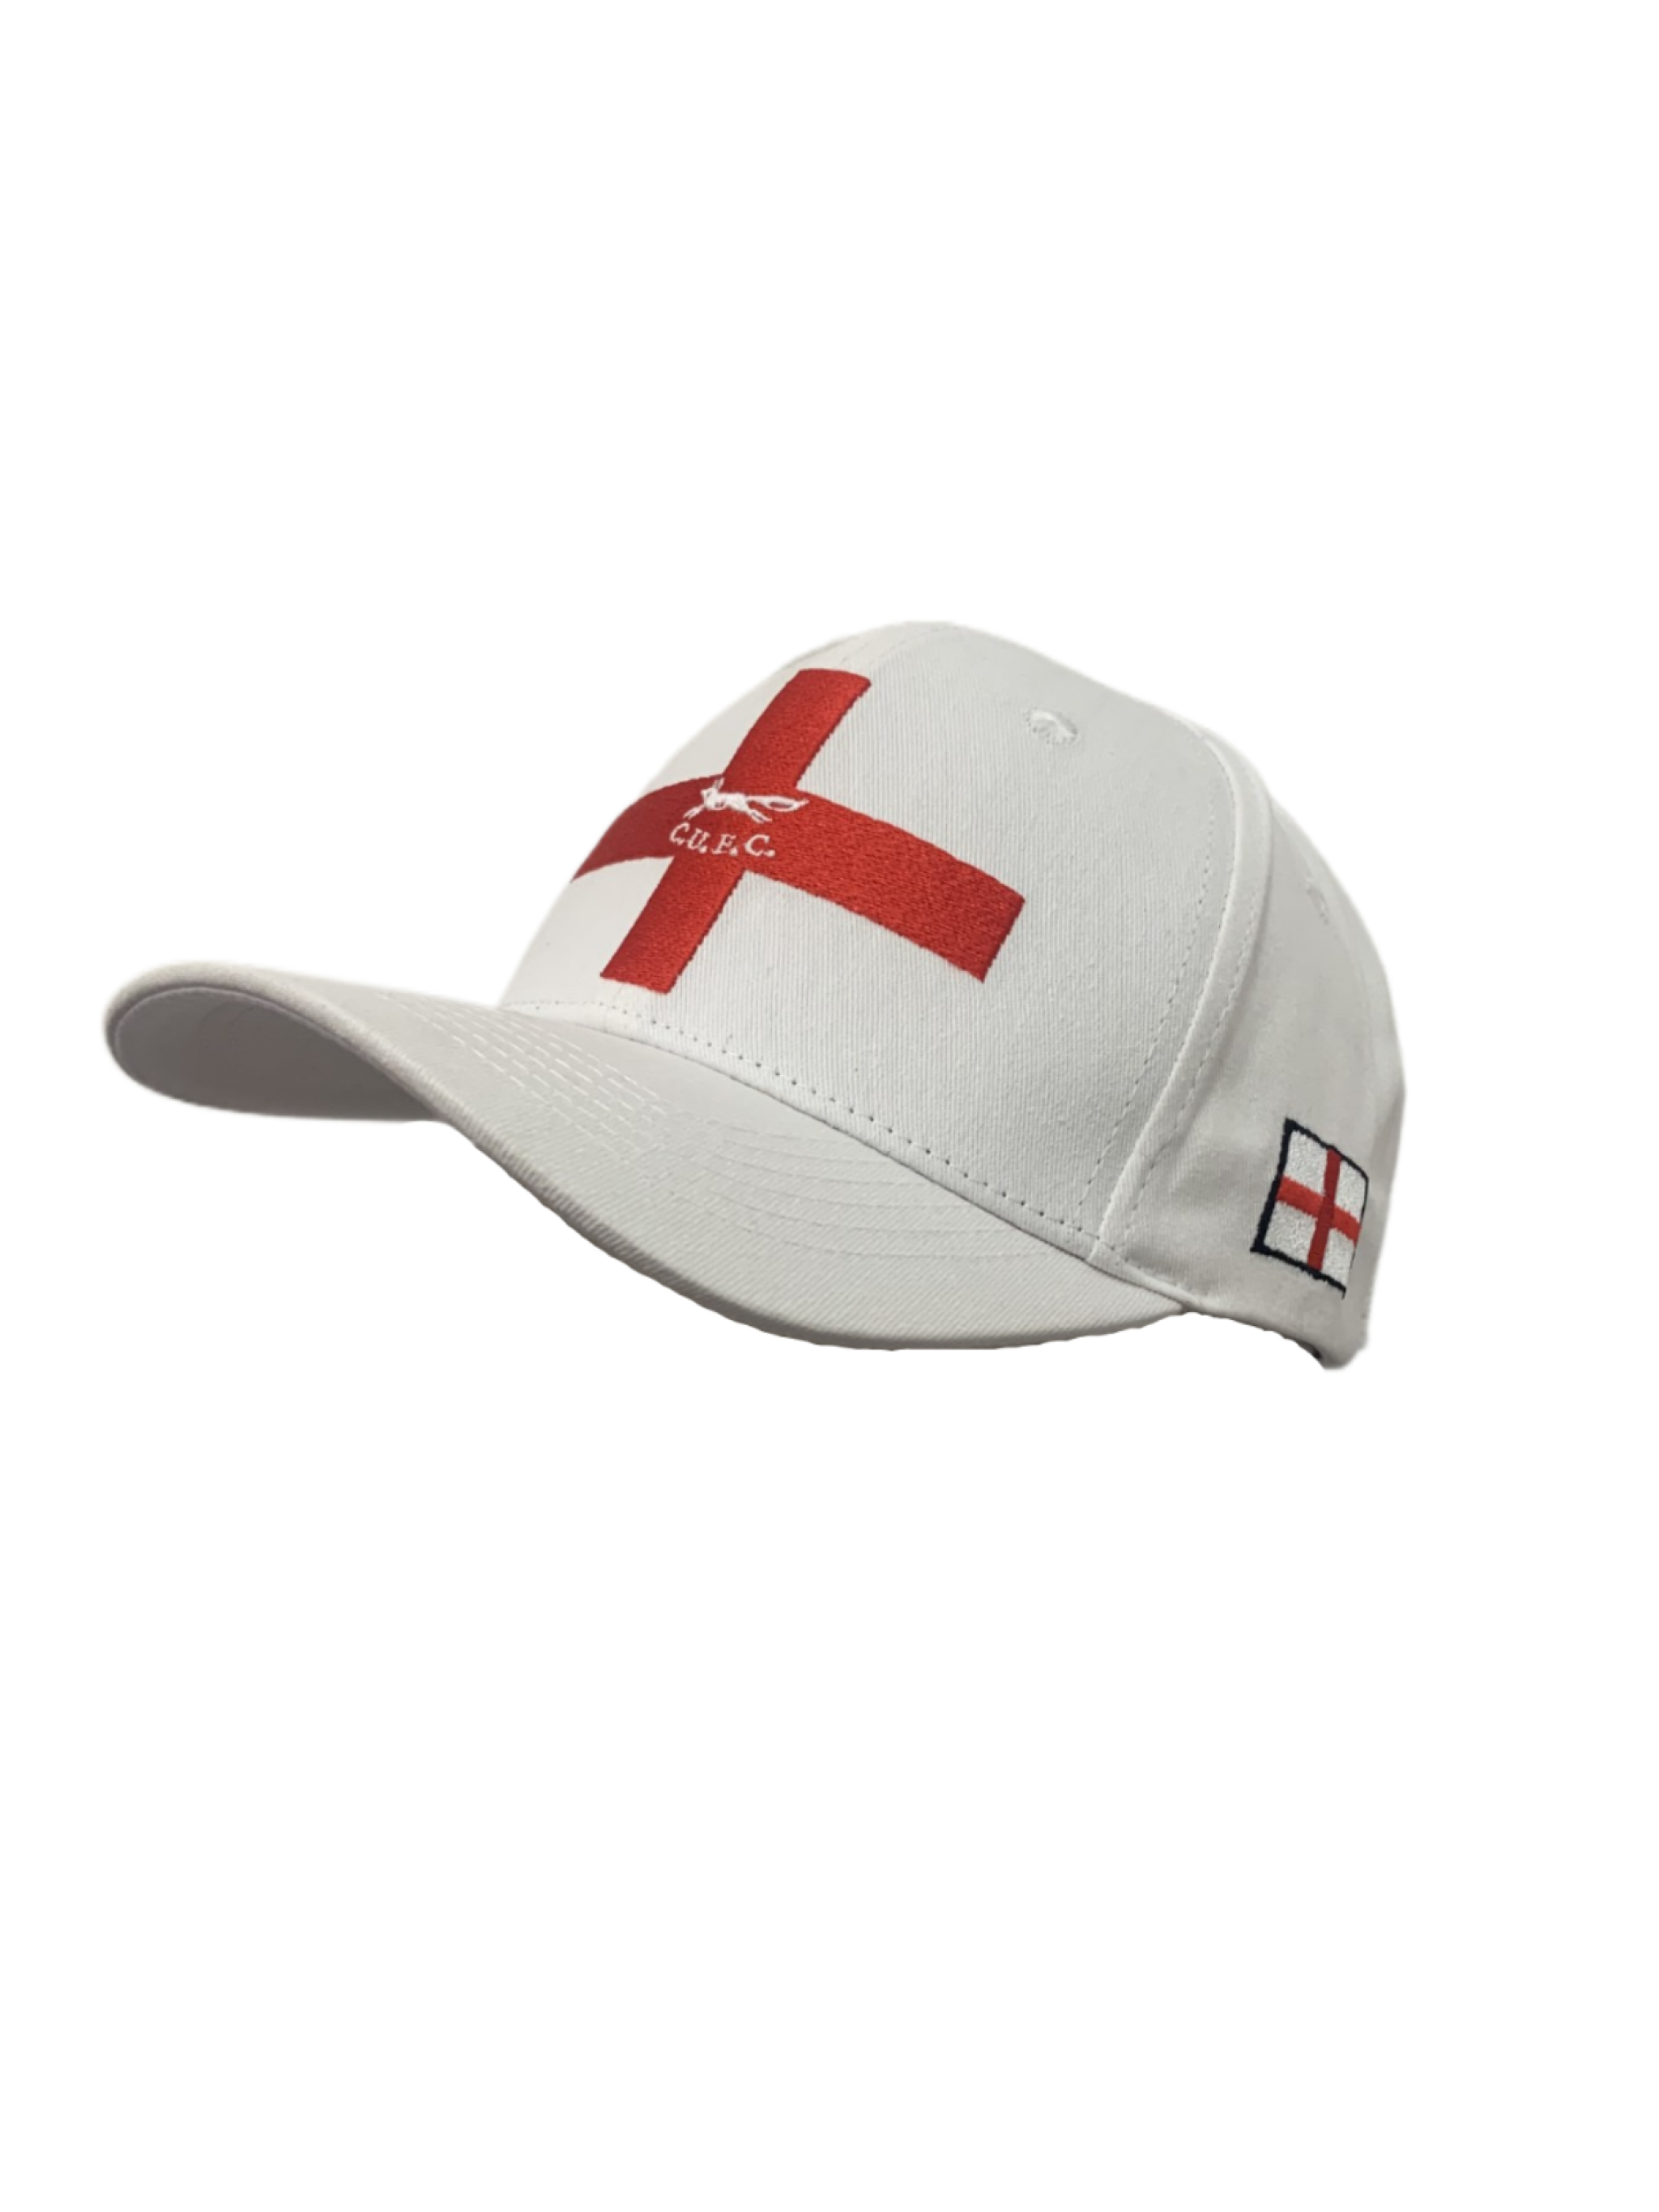 england hat.png